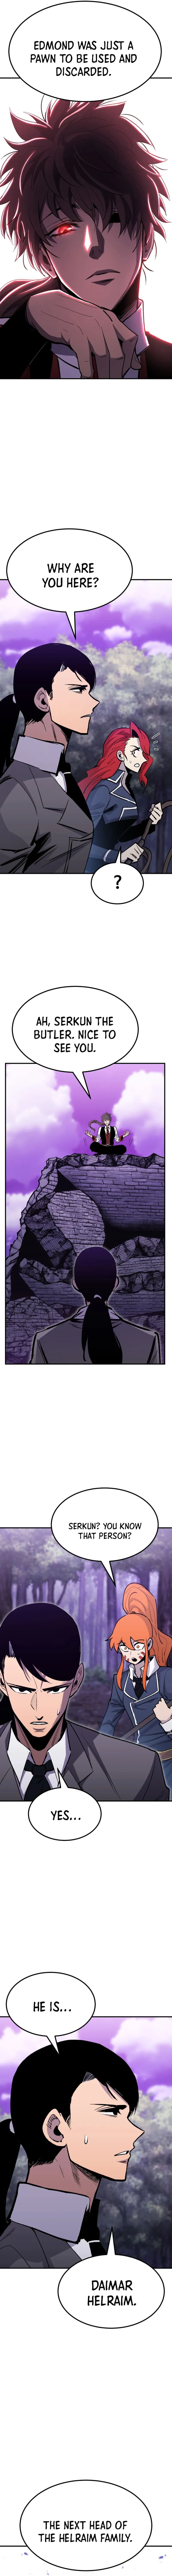 Standard of Reincarnation Chapter 86.3 page 2